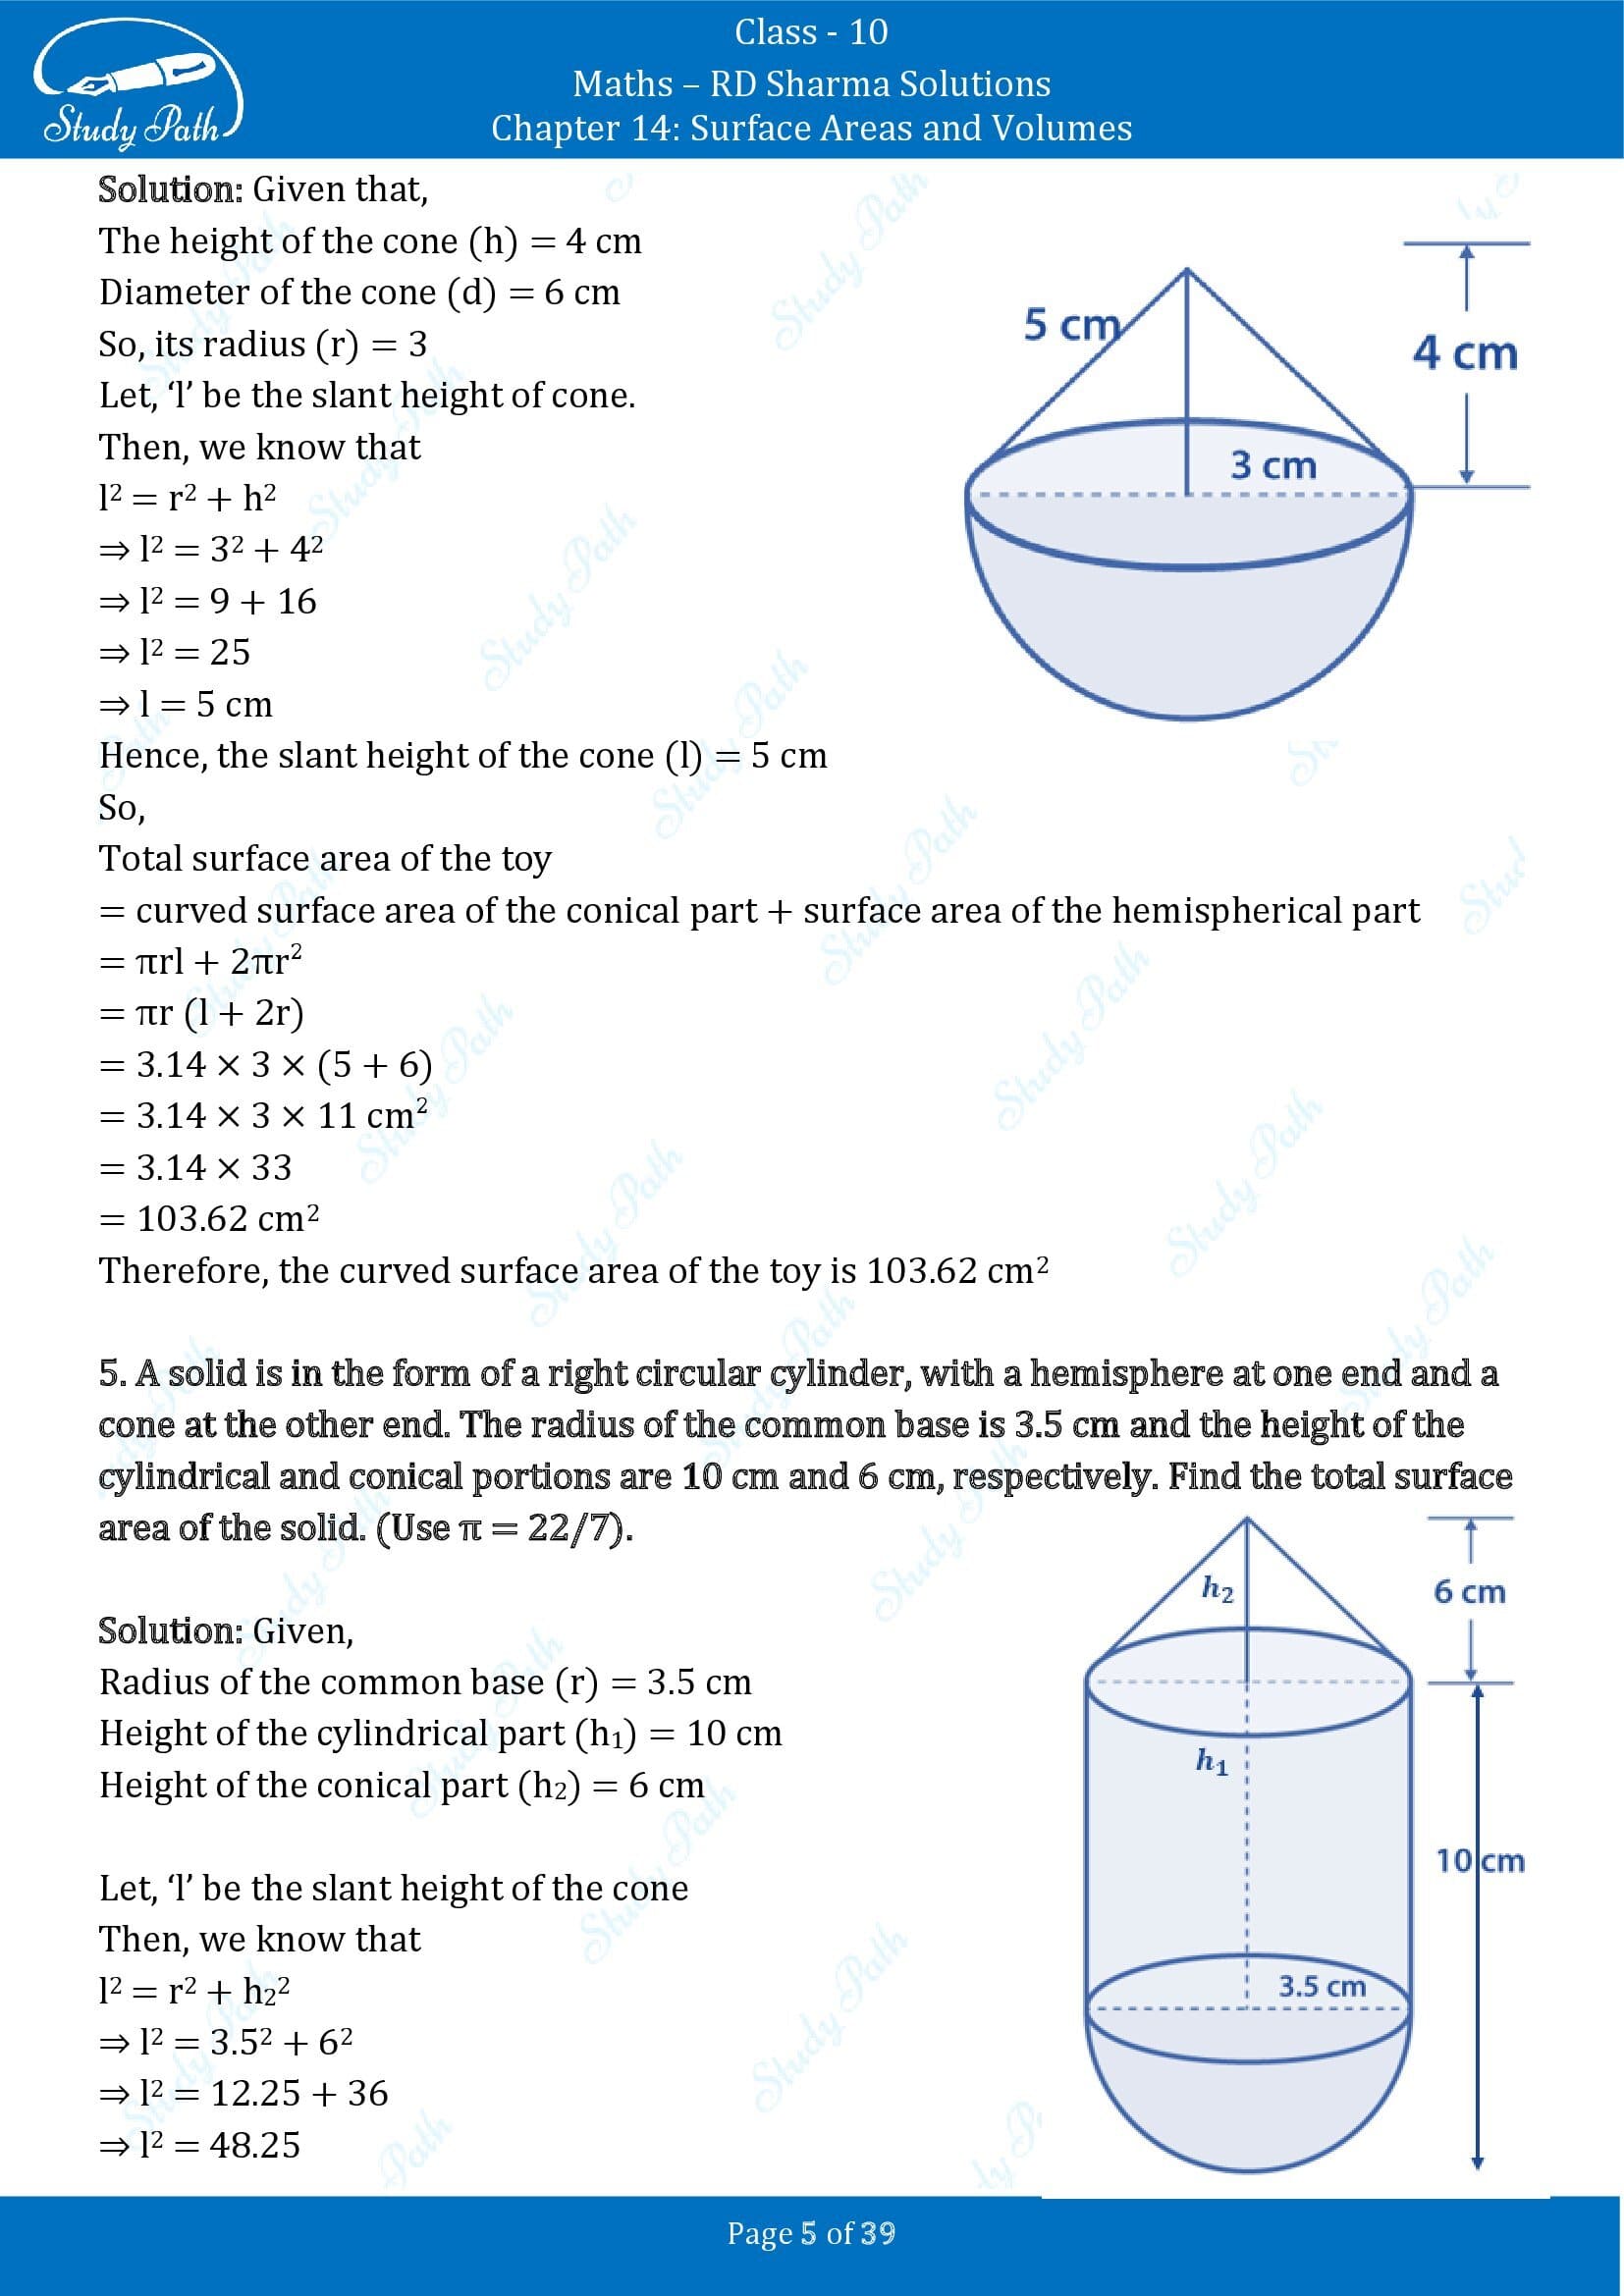 RD Sharma Solutions Class 10 Chapter 14 Surface Areas and Volumes Exercise 14.2 00005